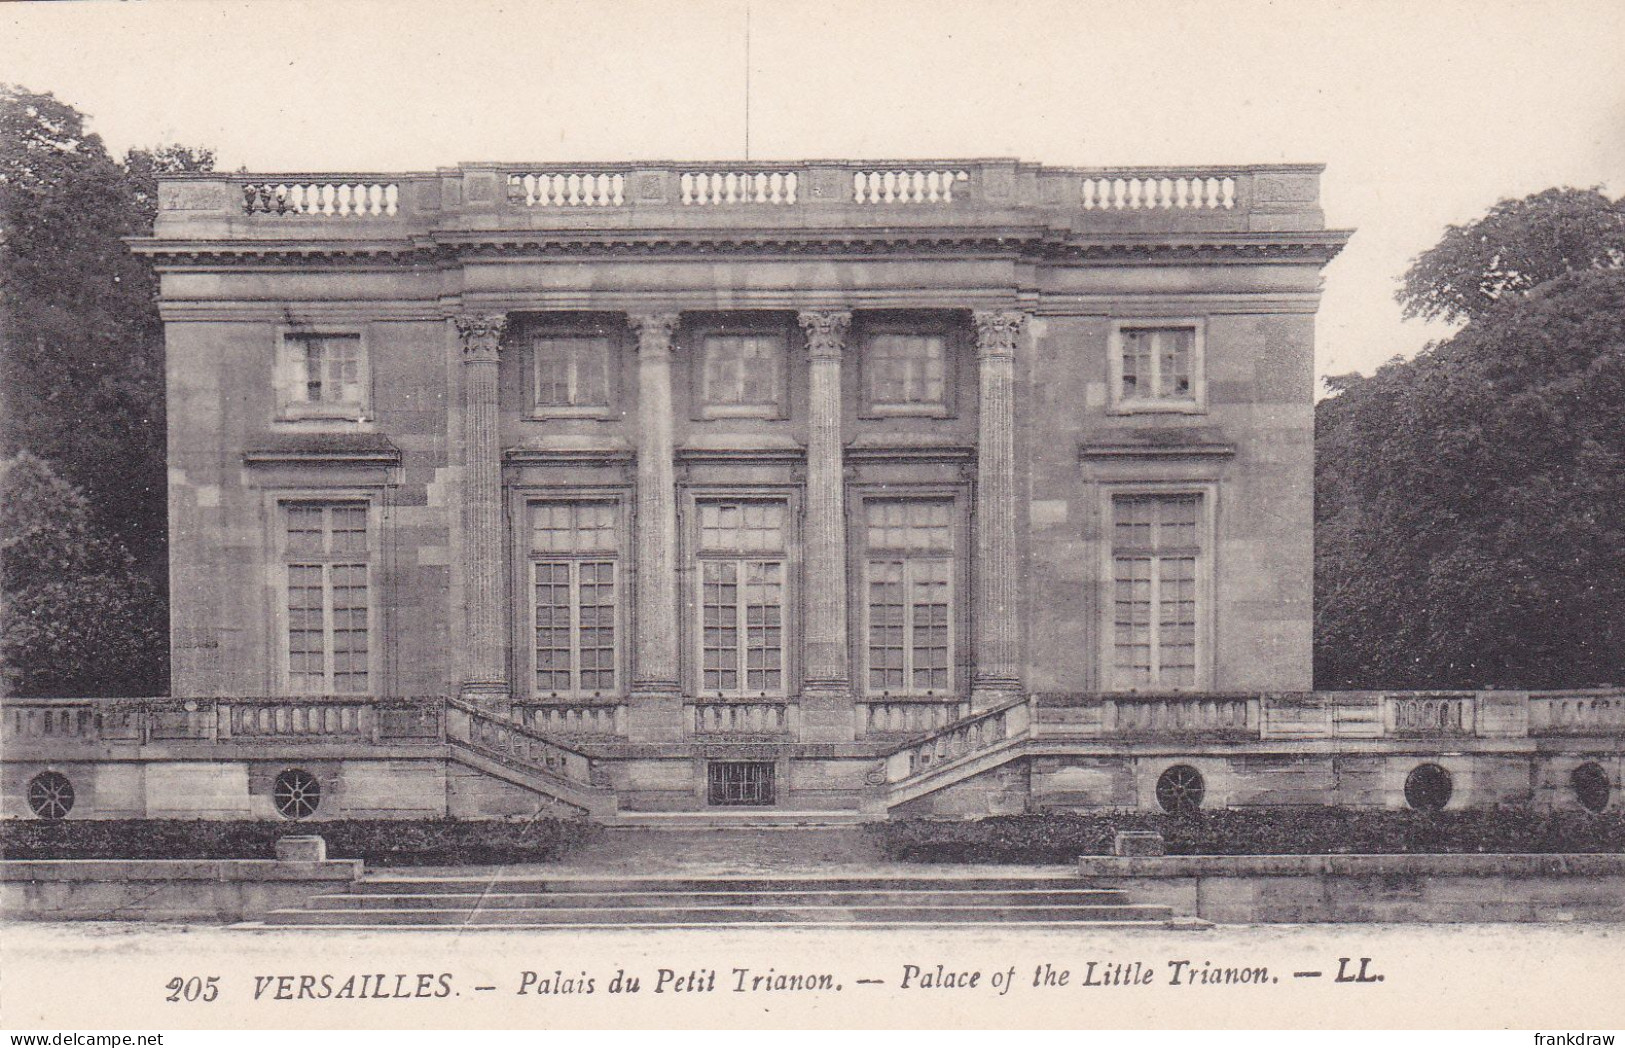 Postcard - Versailles - Palais Du Petit Trianon - The Palace Of The Little Trianon - Card No. 205 - VG - Unclassified